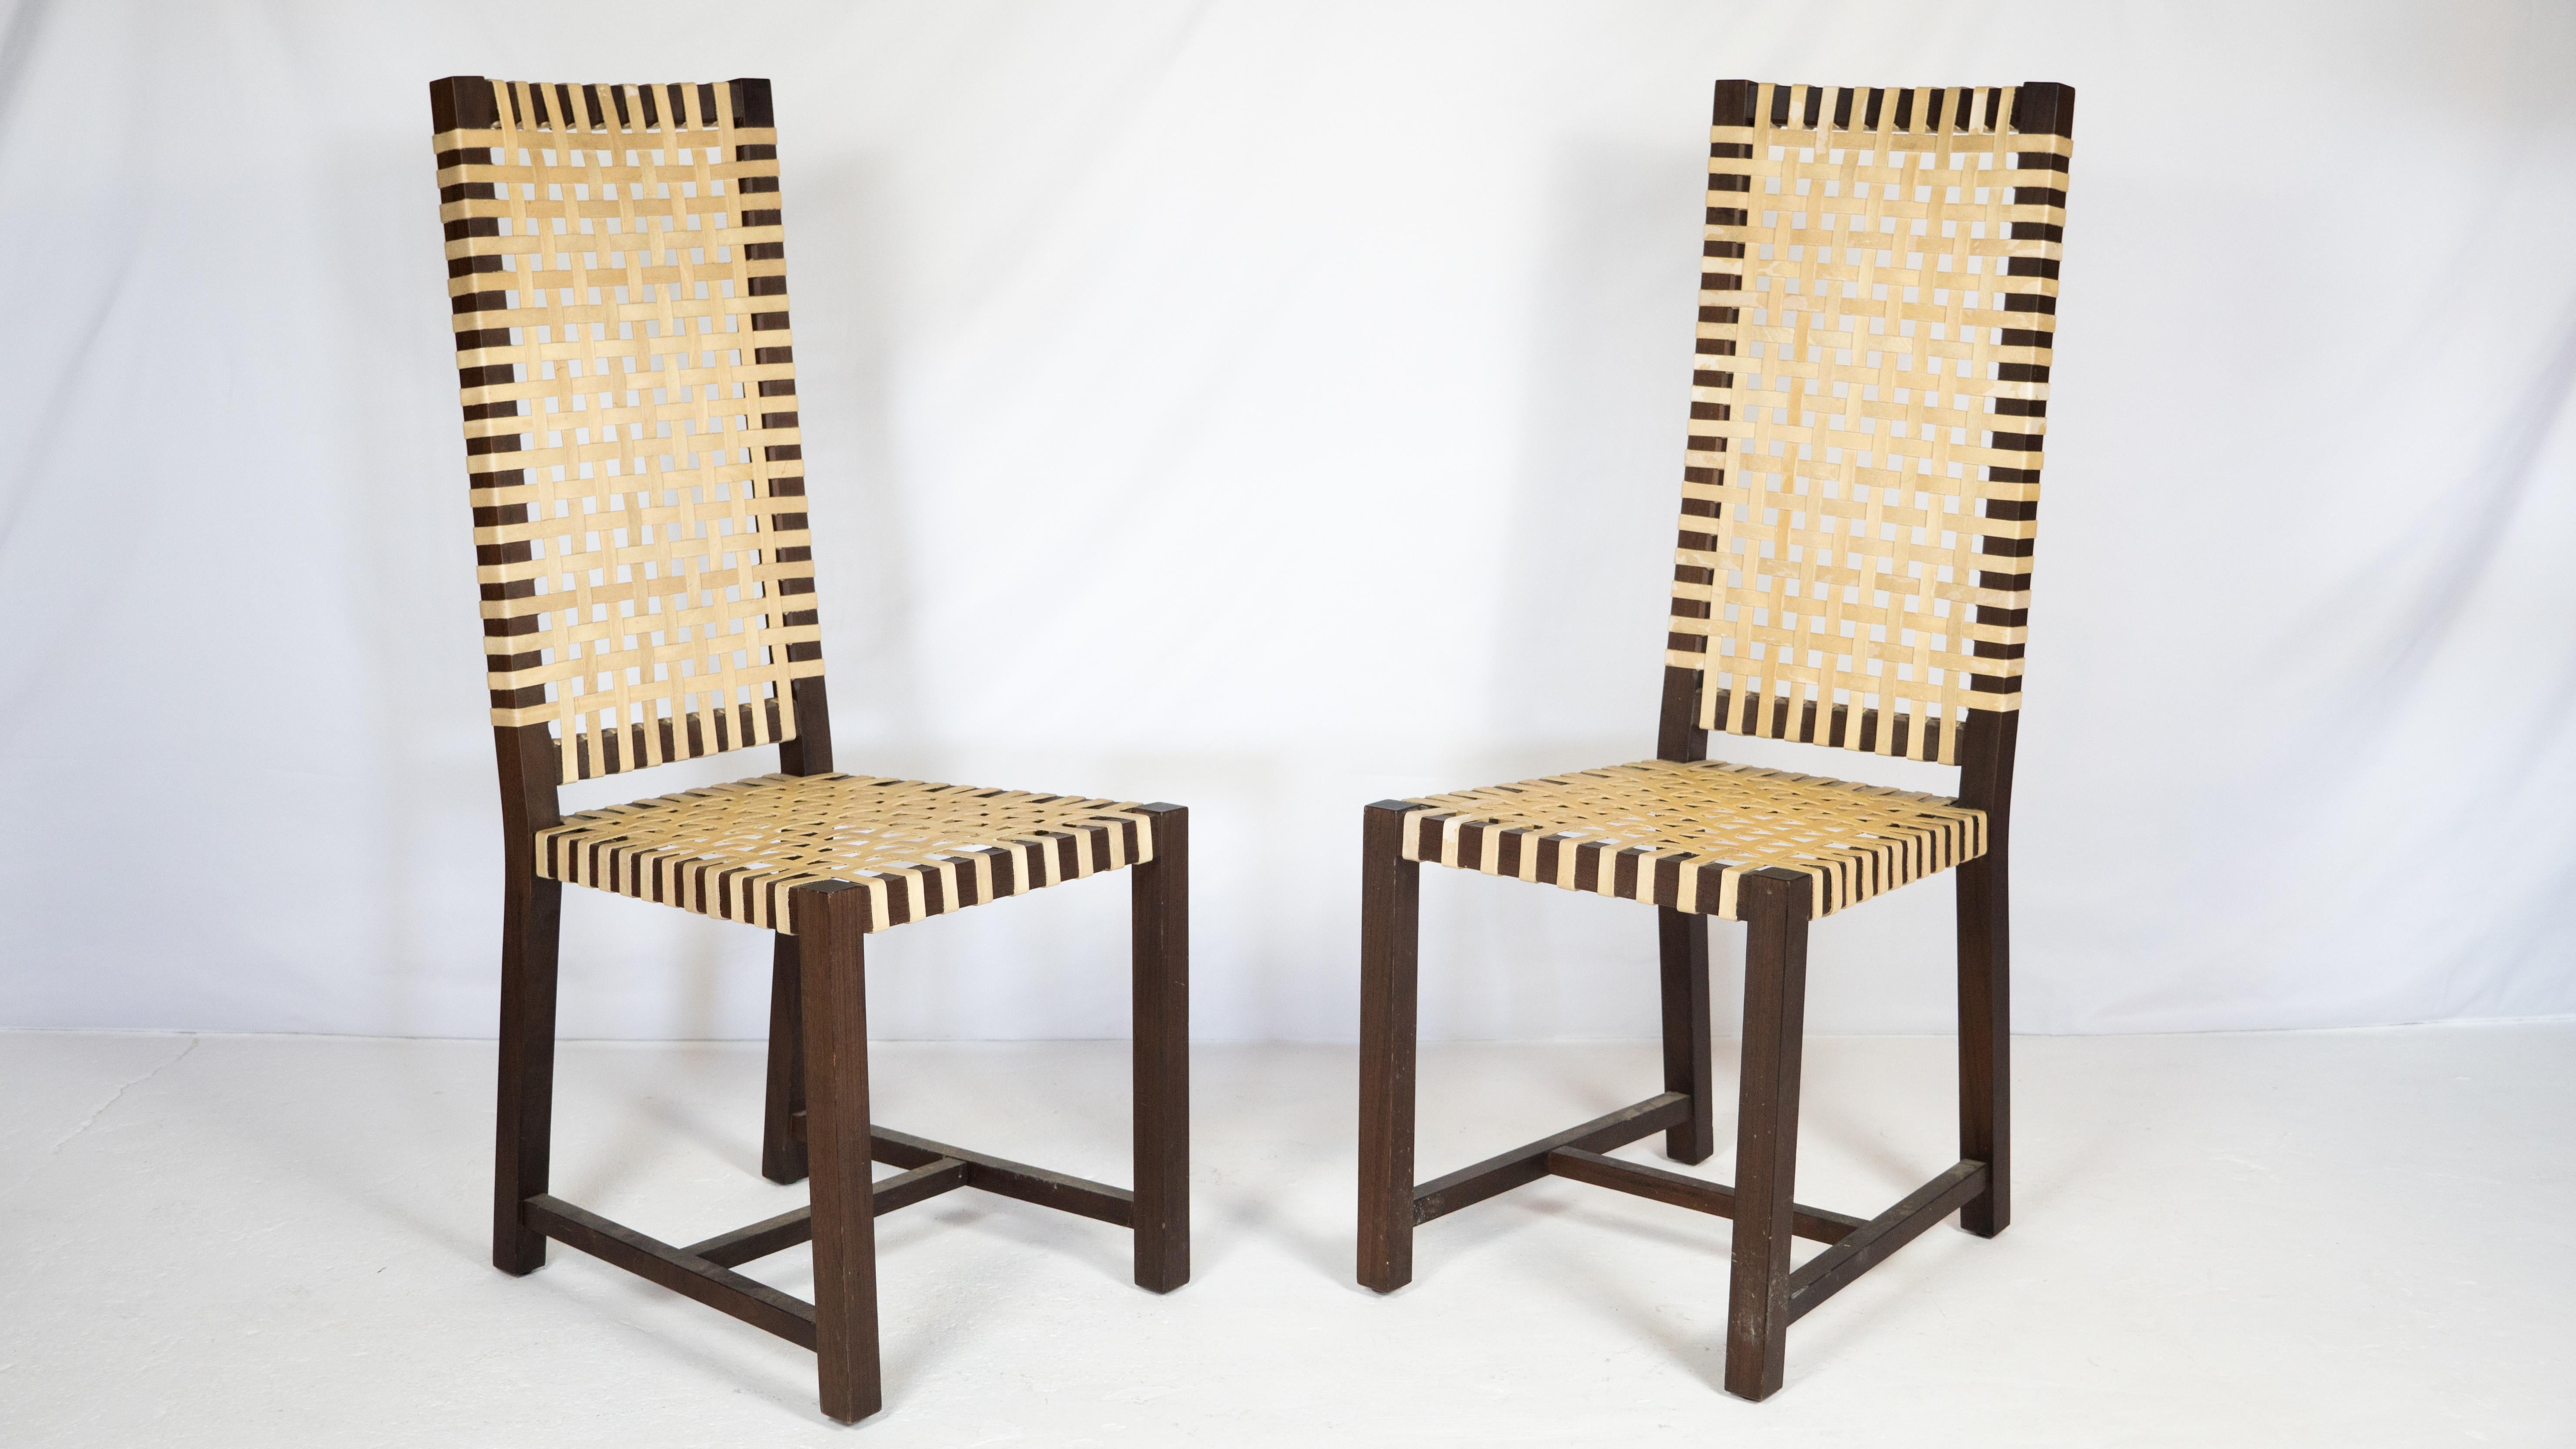 1980s Italian Architectural Otto 121' High Back Chairs by Paola Navone for Gerva In Good Condition For Sale In Boston, MA